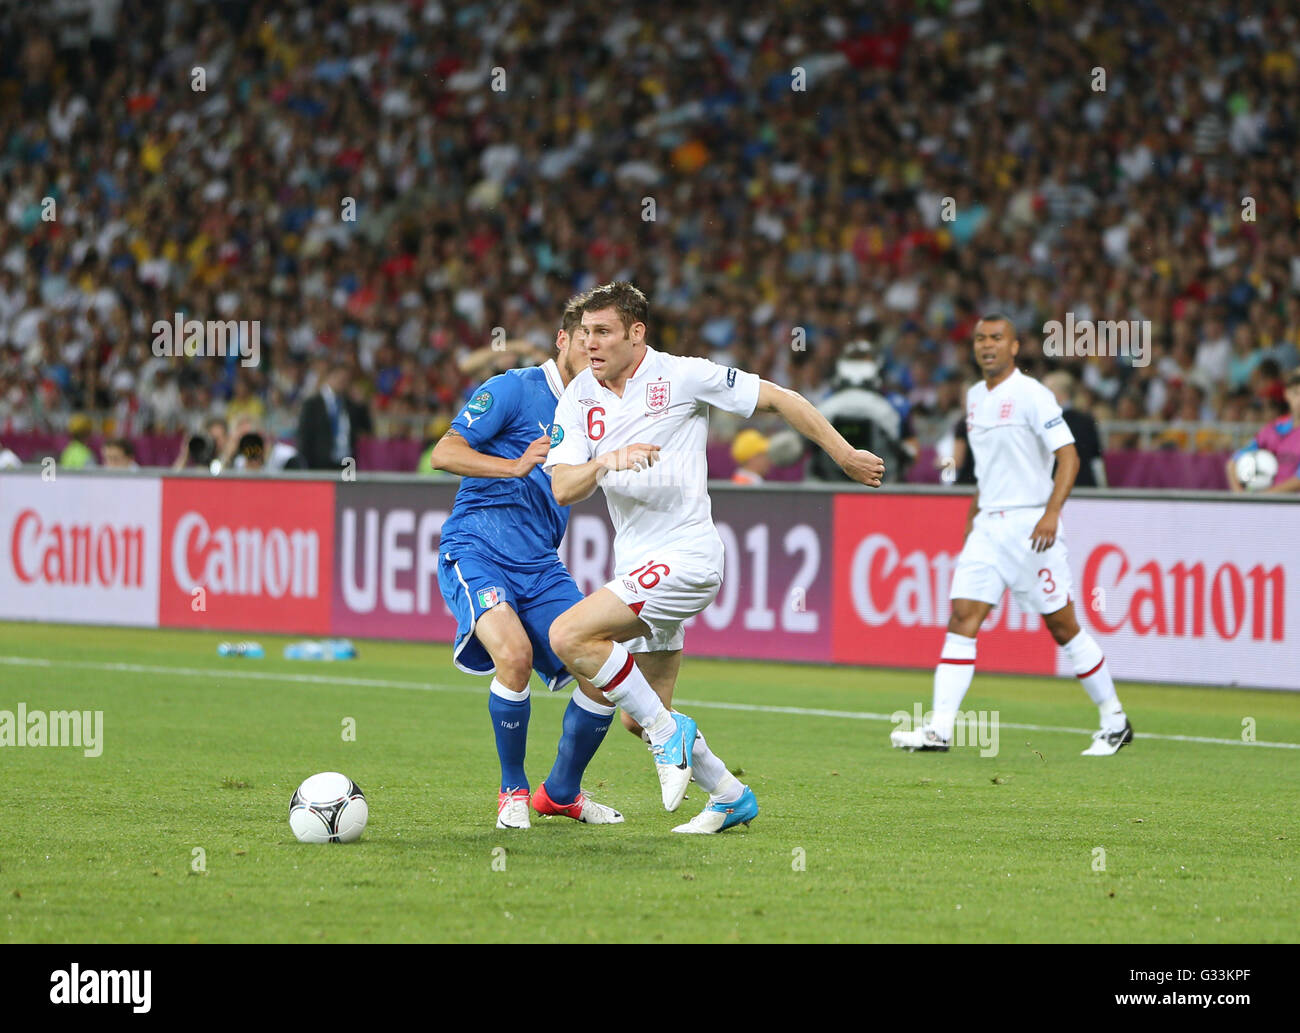 KYIV, UKRAINE - JUNE 24, 2012: James Milner of England (R) fights for a ball with Federico Balzaretti of Italy during their UEFA EURO 2012 Quarter-final game at Olympic stadium in Kyiv, Ukraine Stock Photo